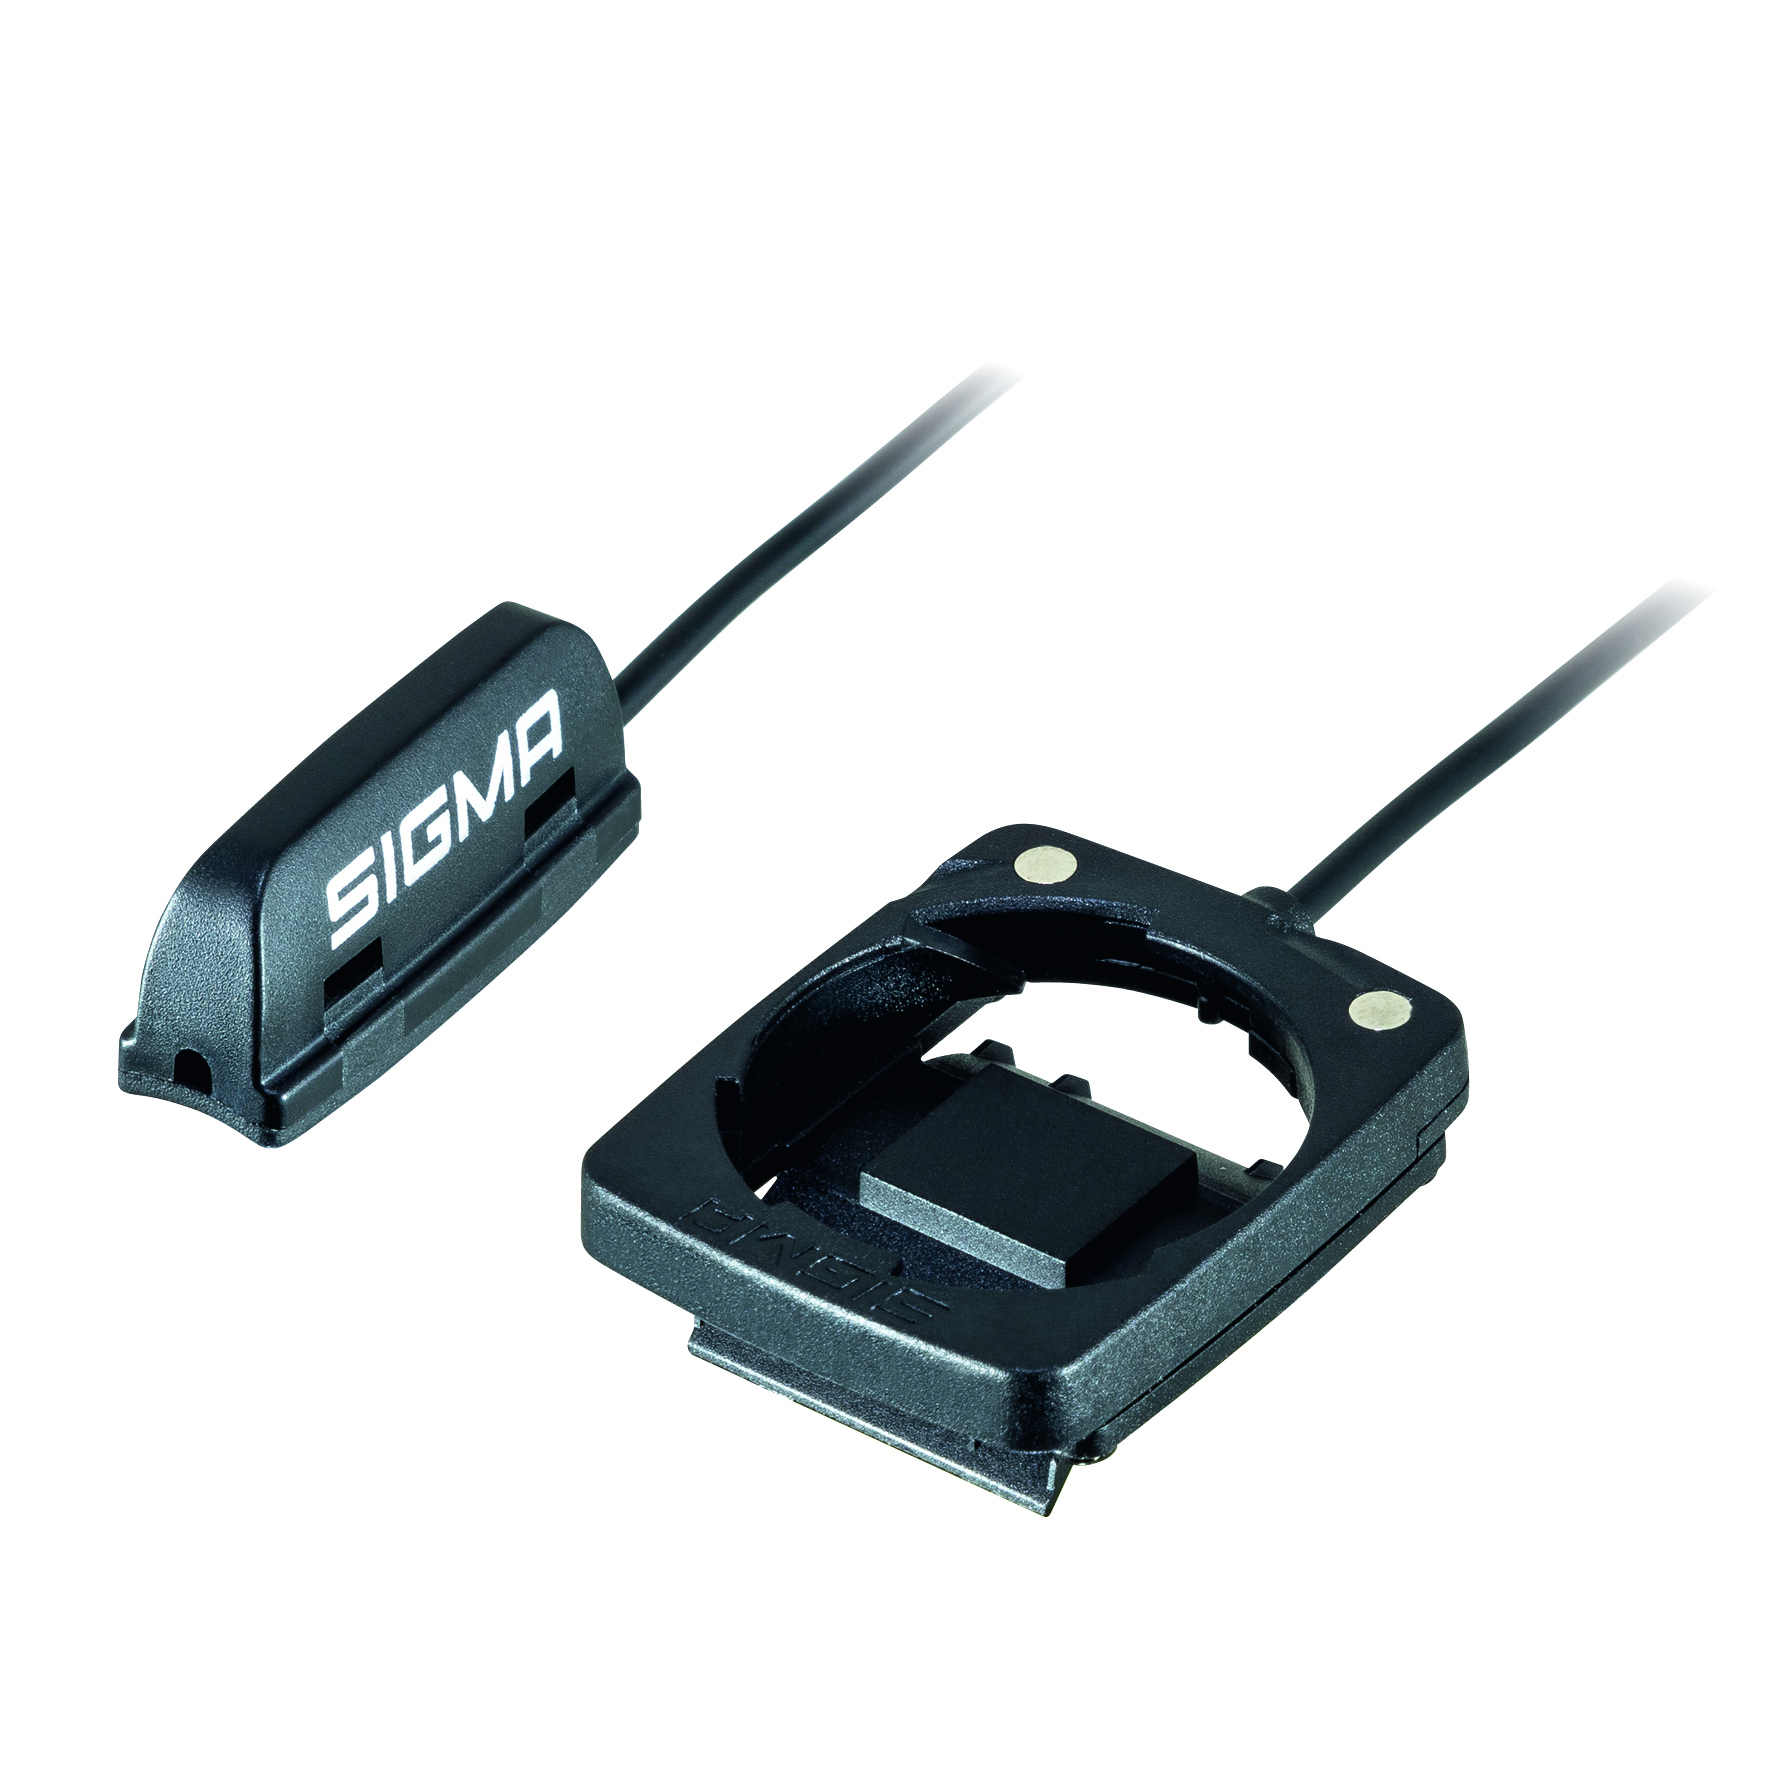 Support filaire Sigma 2032 BC 5.0 WR, B.0 WR, 10.0 WR